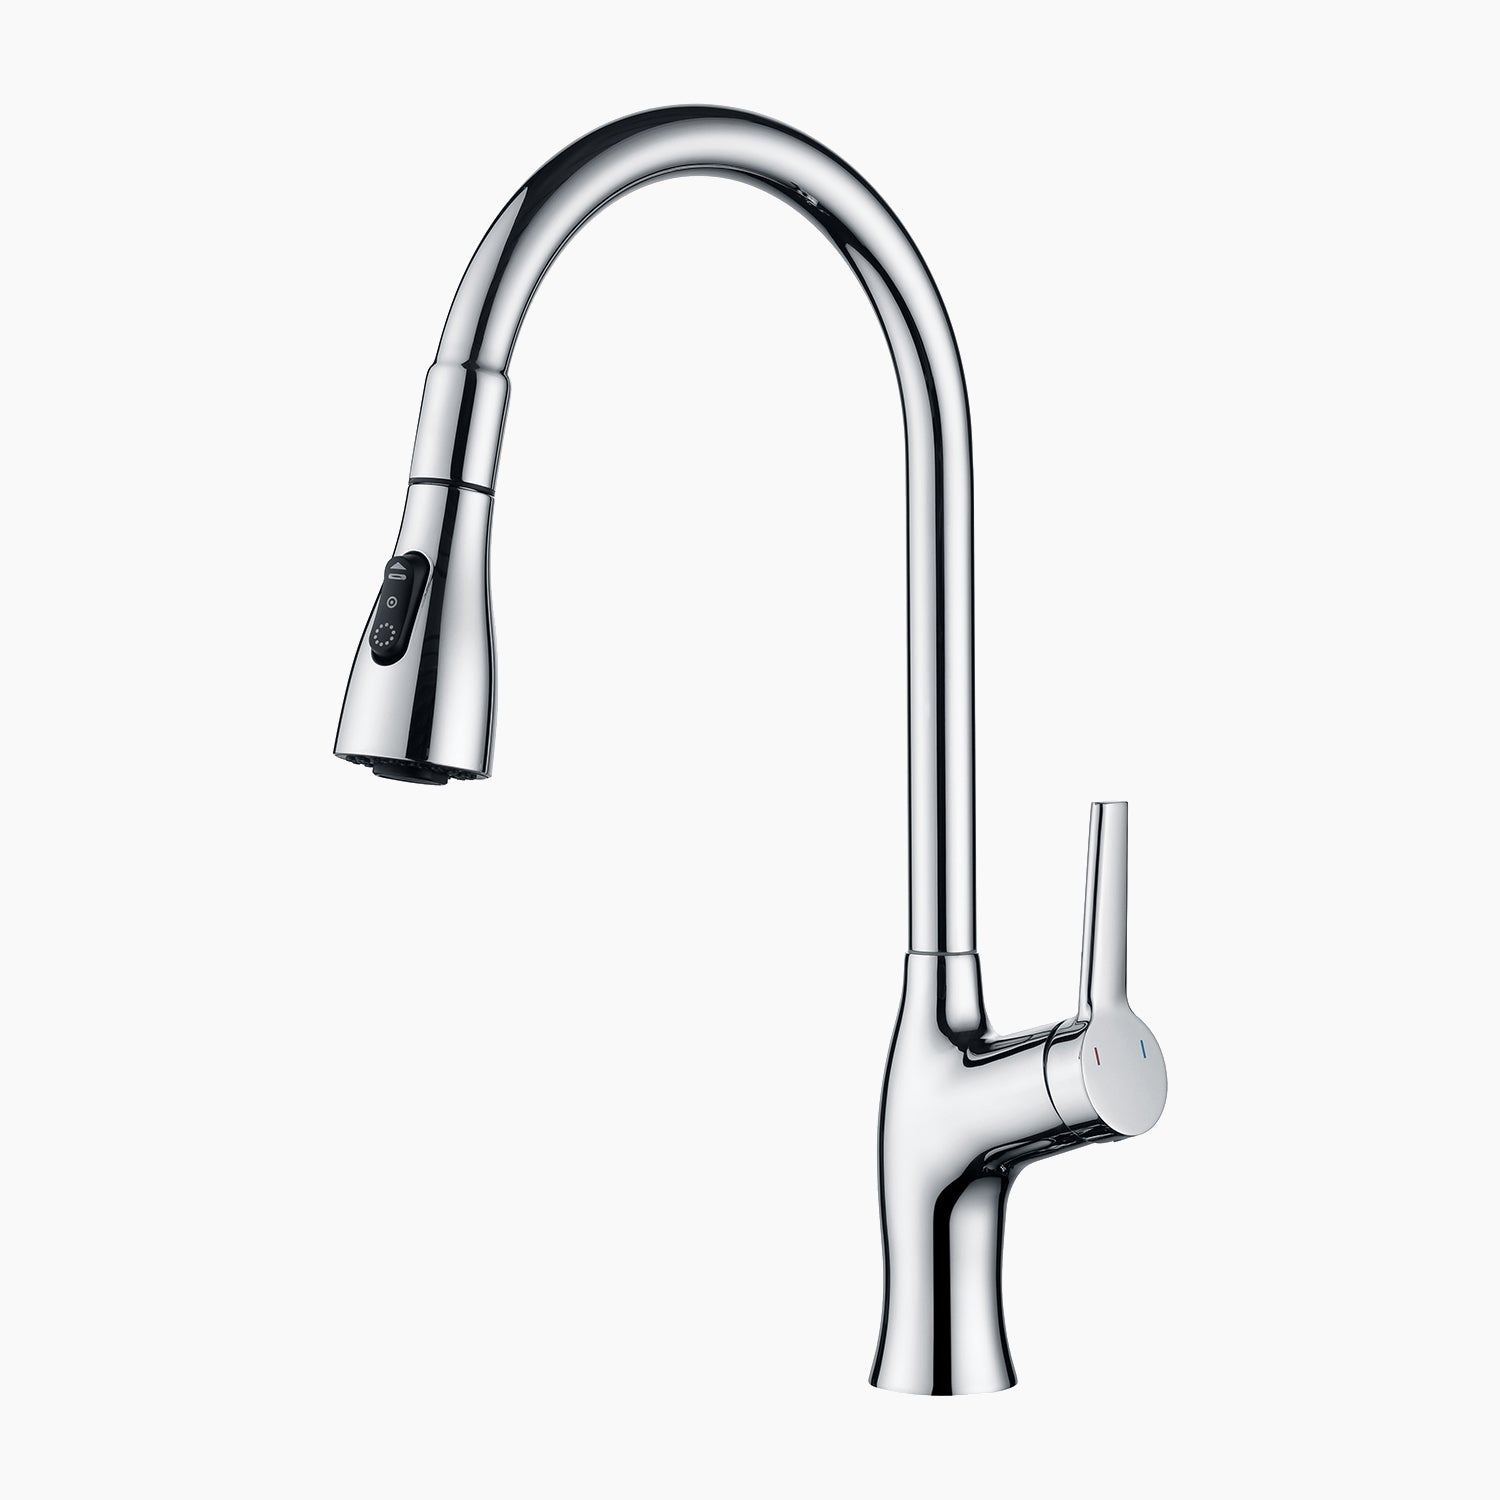 KF2203-1, Lefton Copper Kitchen Pull-Down Faucet with 3 Water Outlet Modes